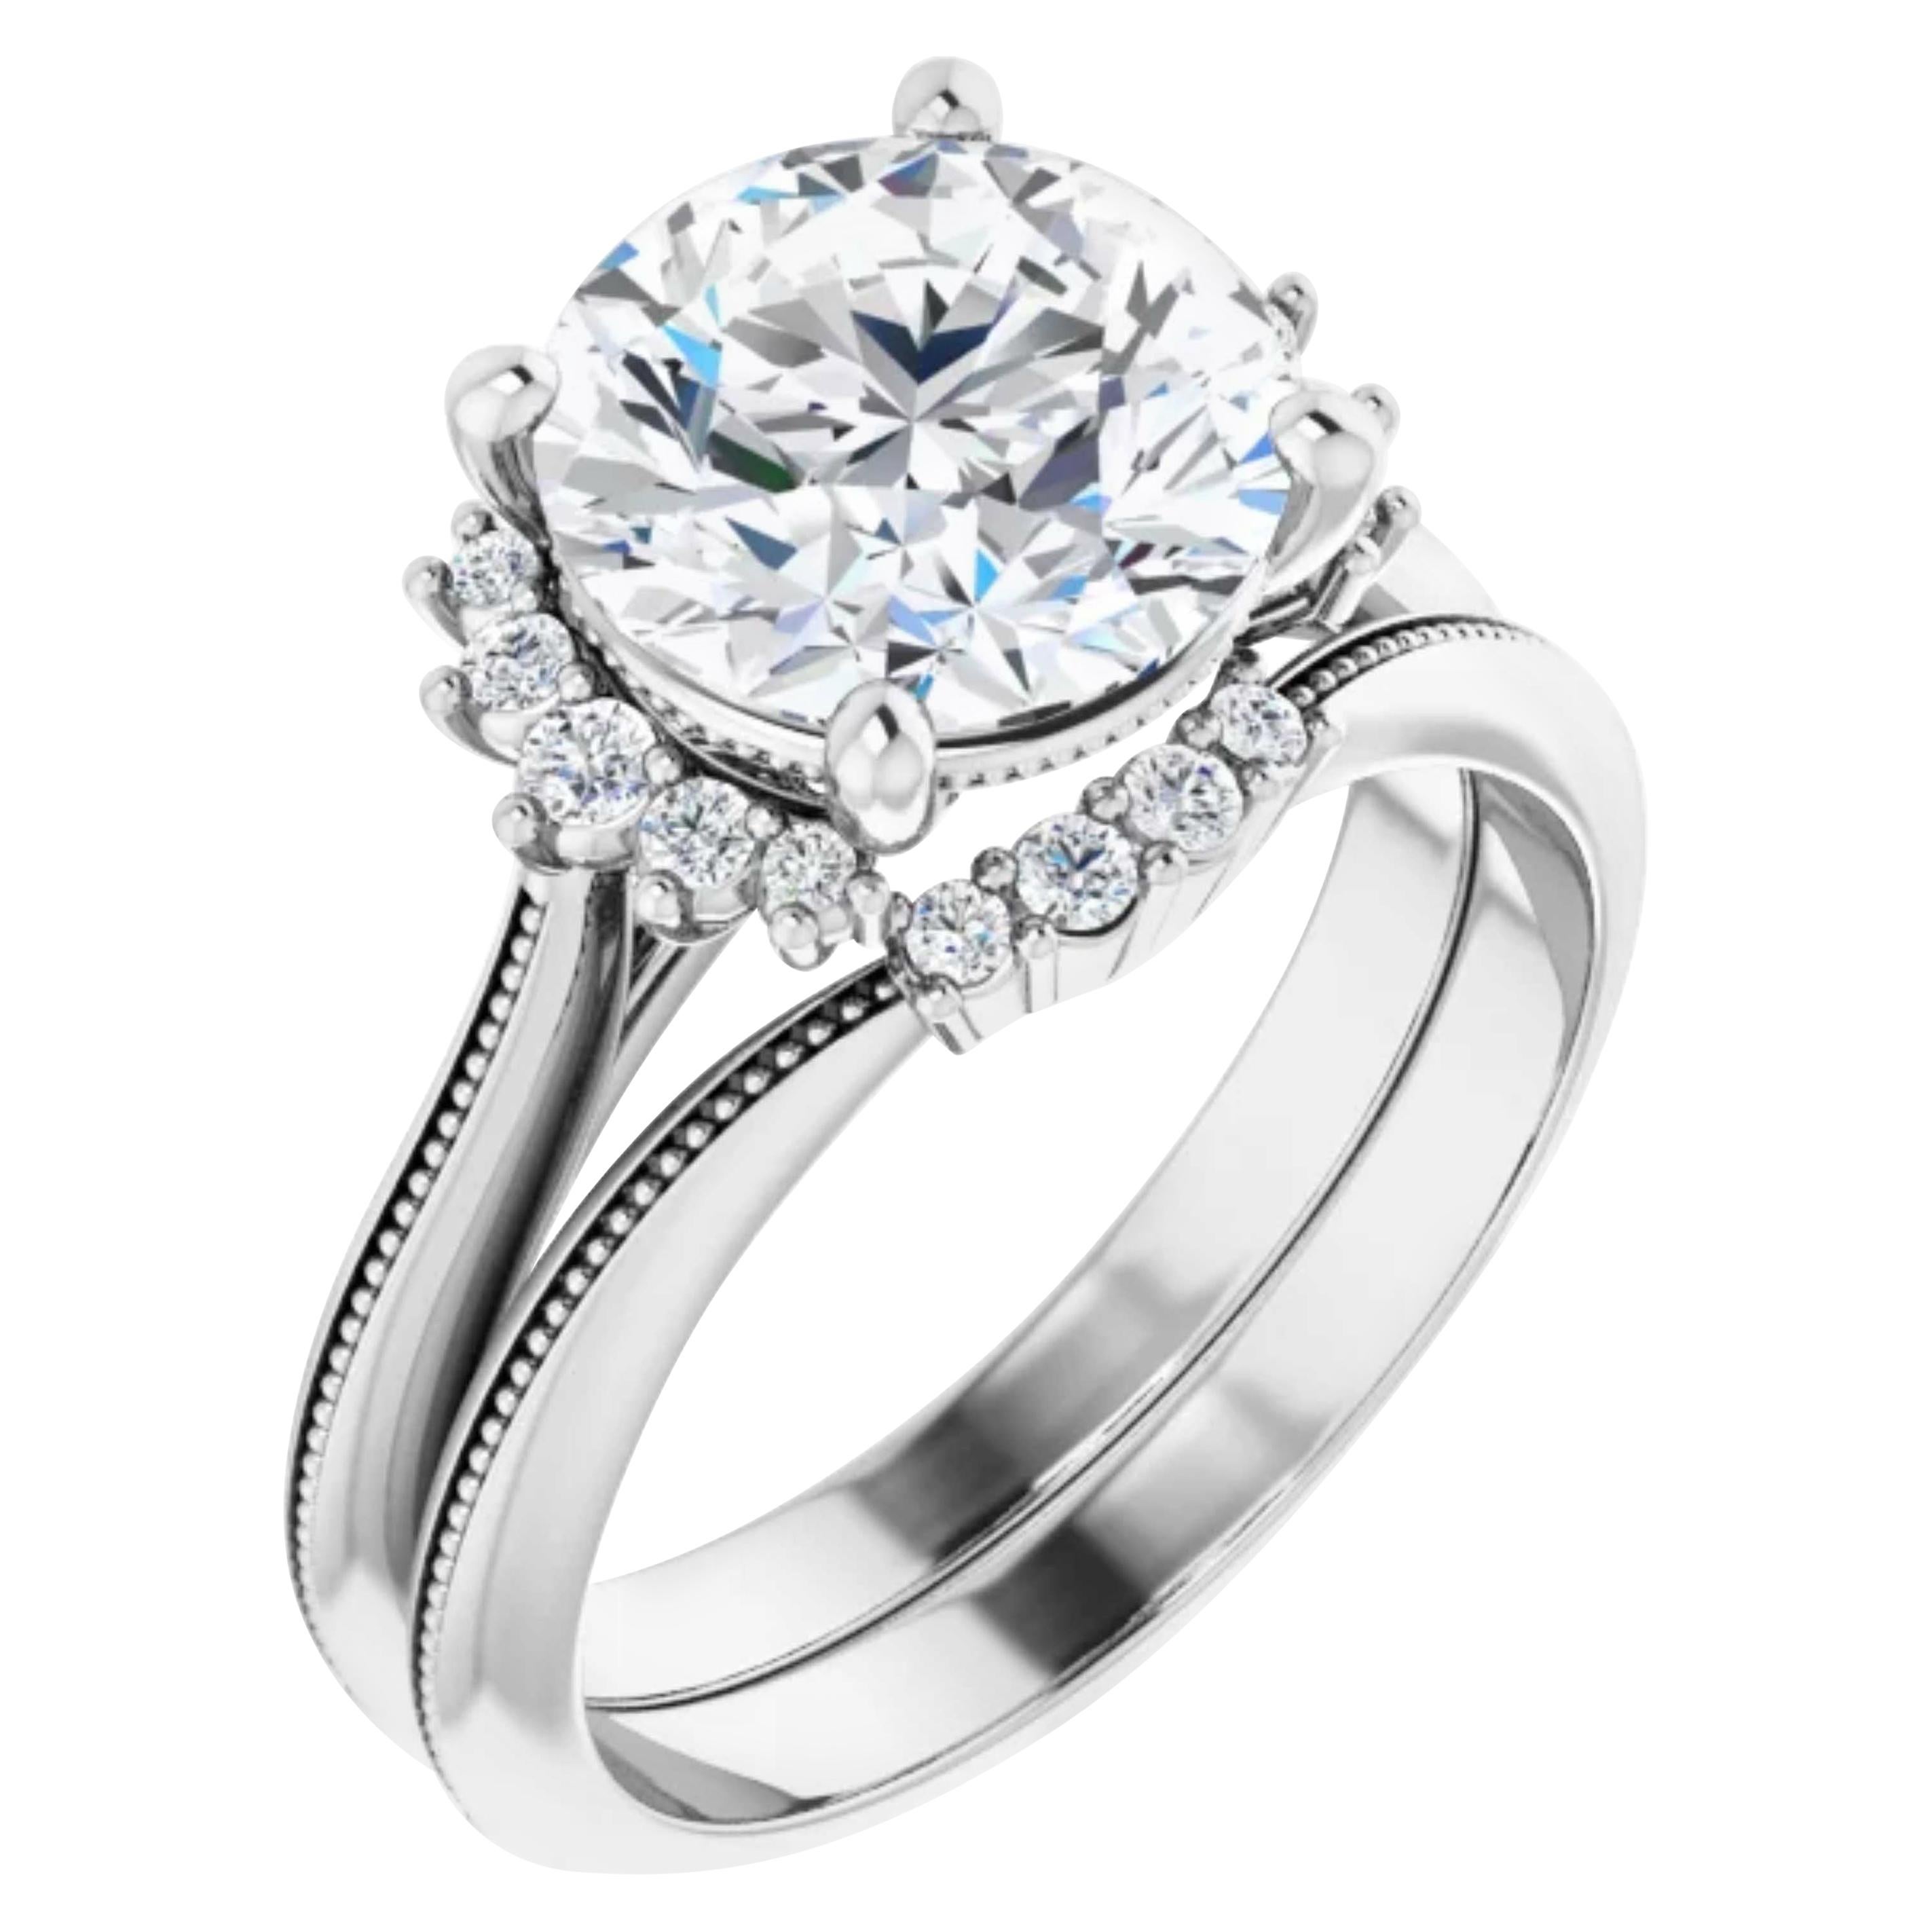 Vintage Style Halo GIA Round Diamond Engagement Ring 18k White Gold 1.05 Carats For Sale